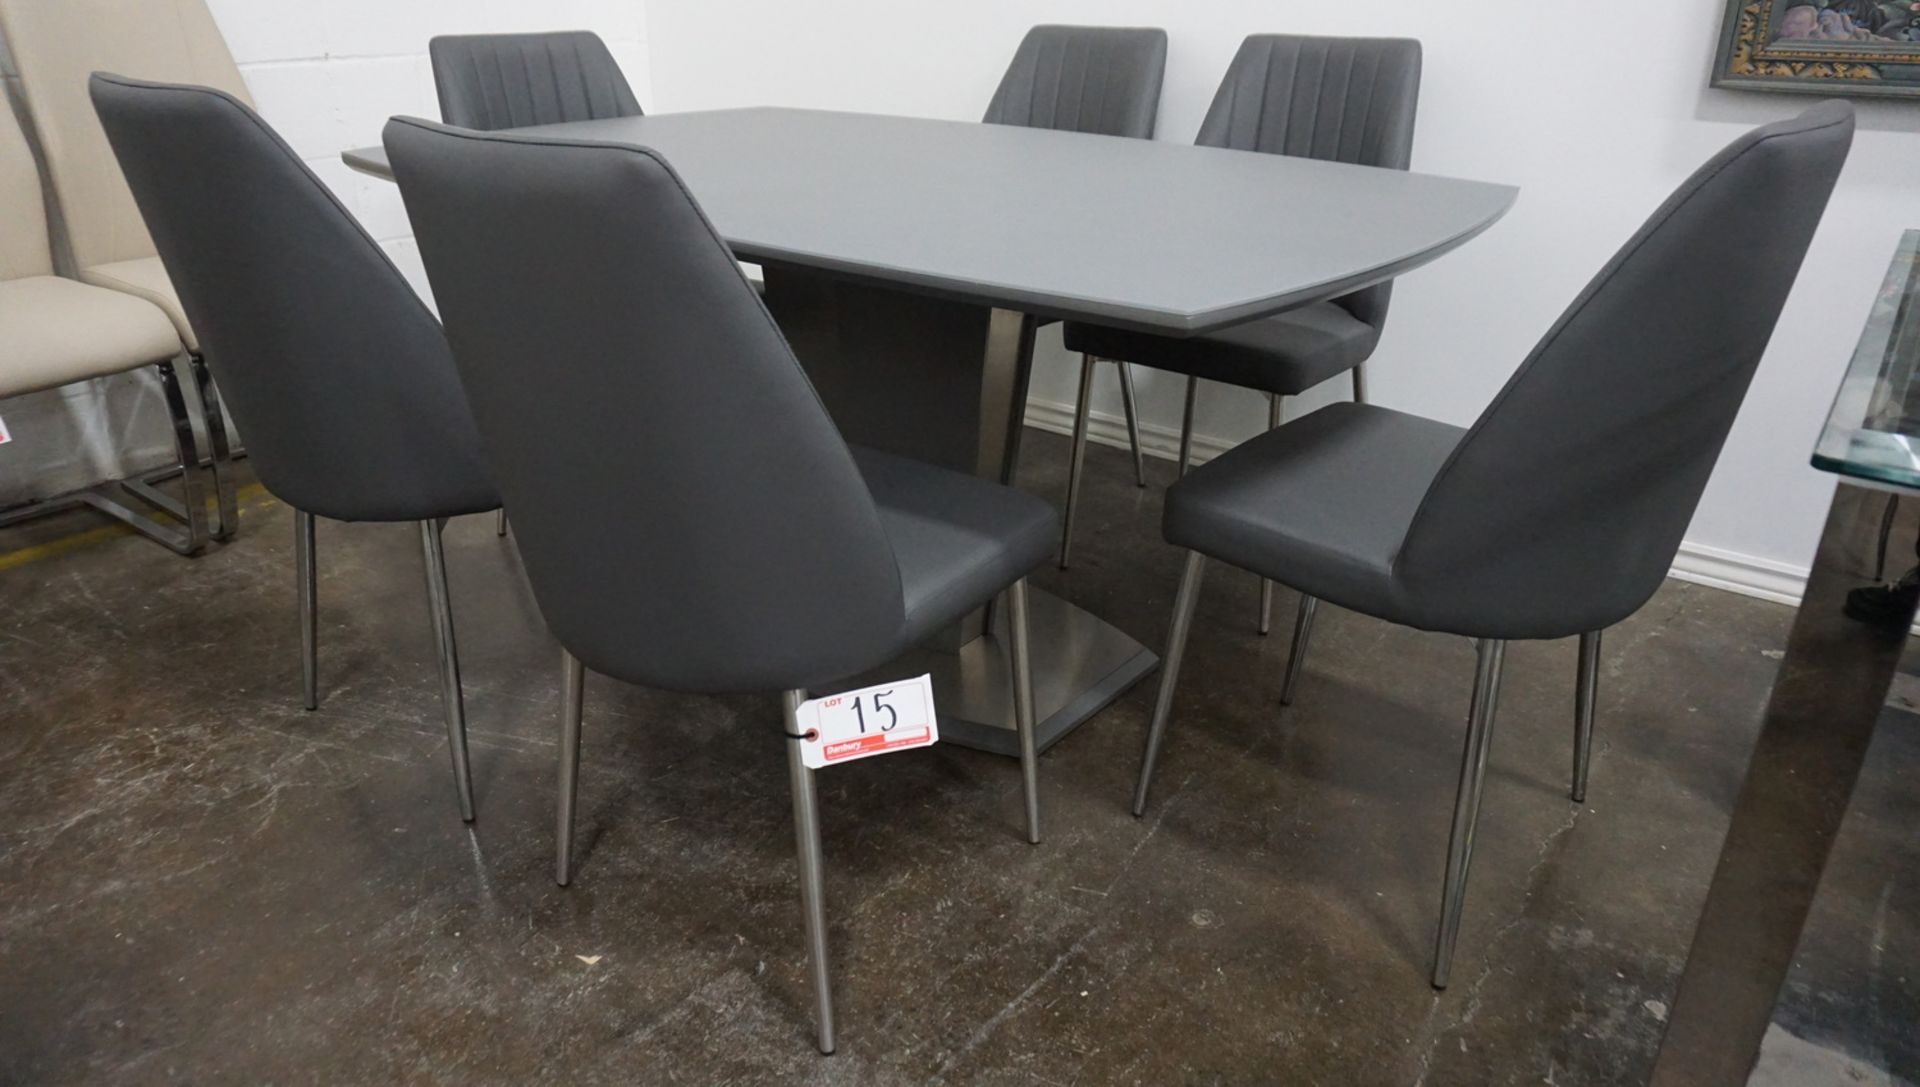 UNITS - GREY PU LEATHER W/ CHROME LEGS DINING CHAIRS - Image 2 of 2